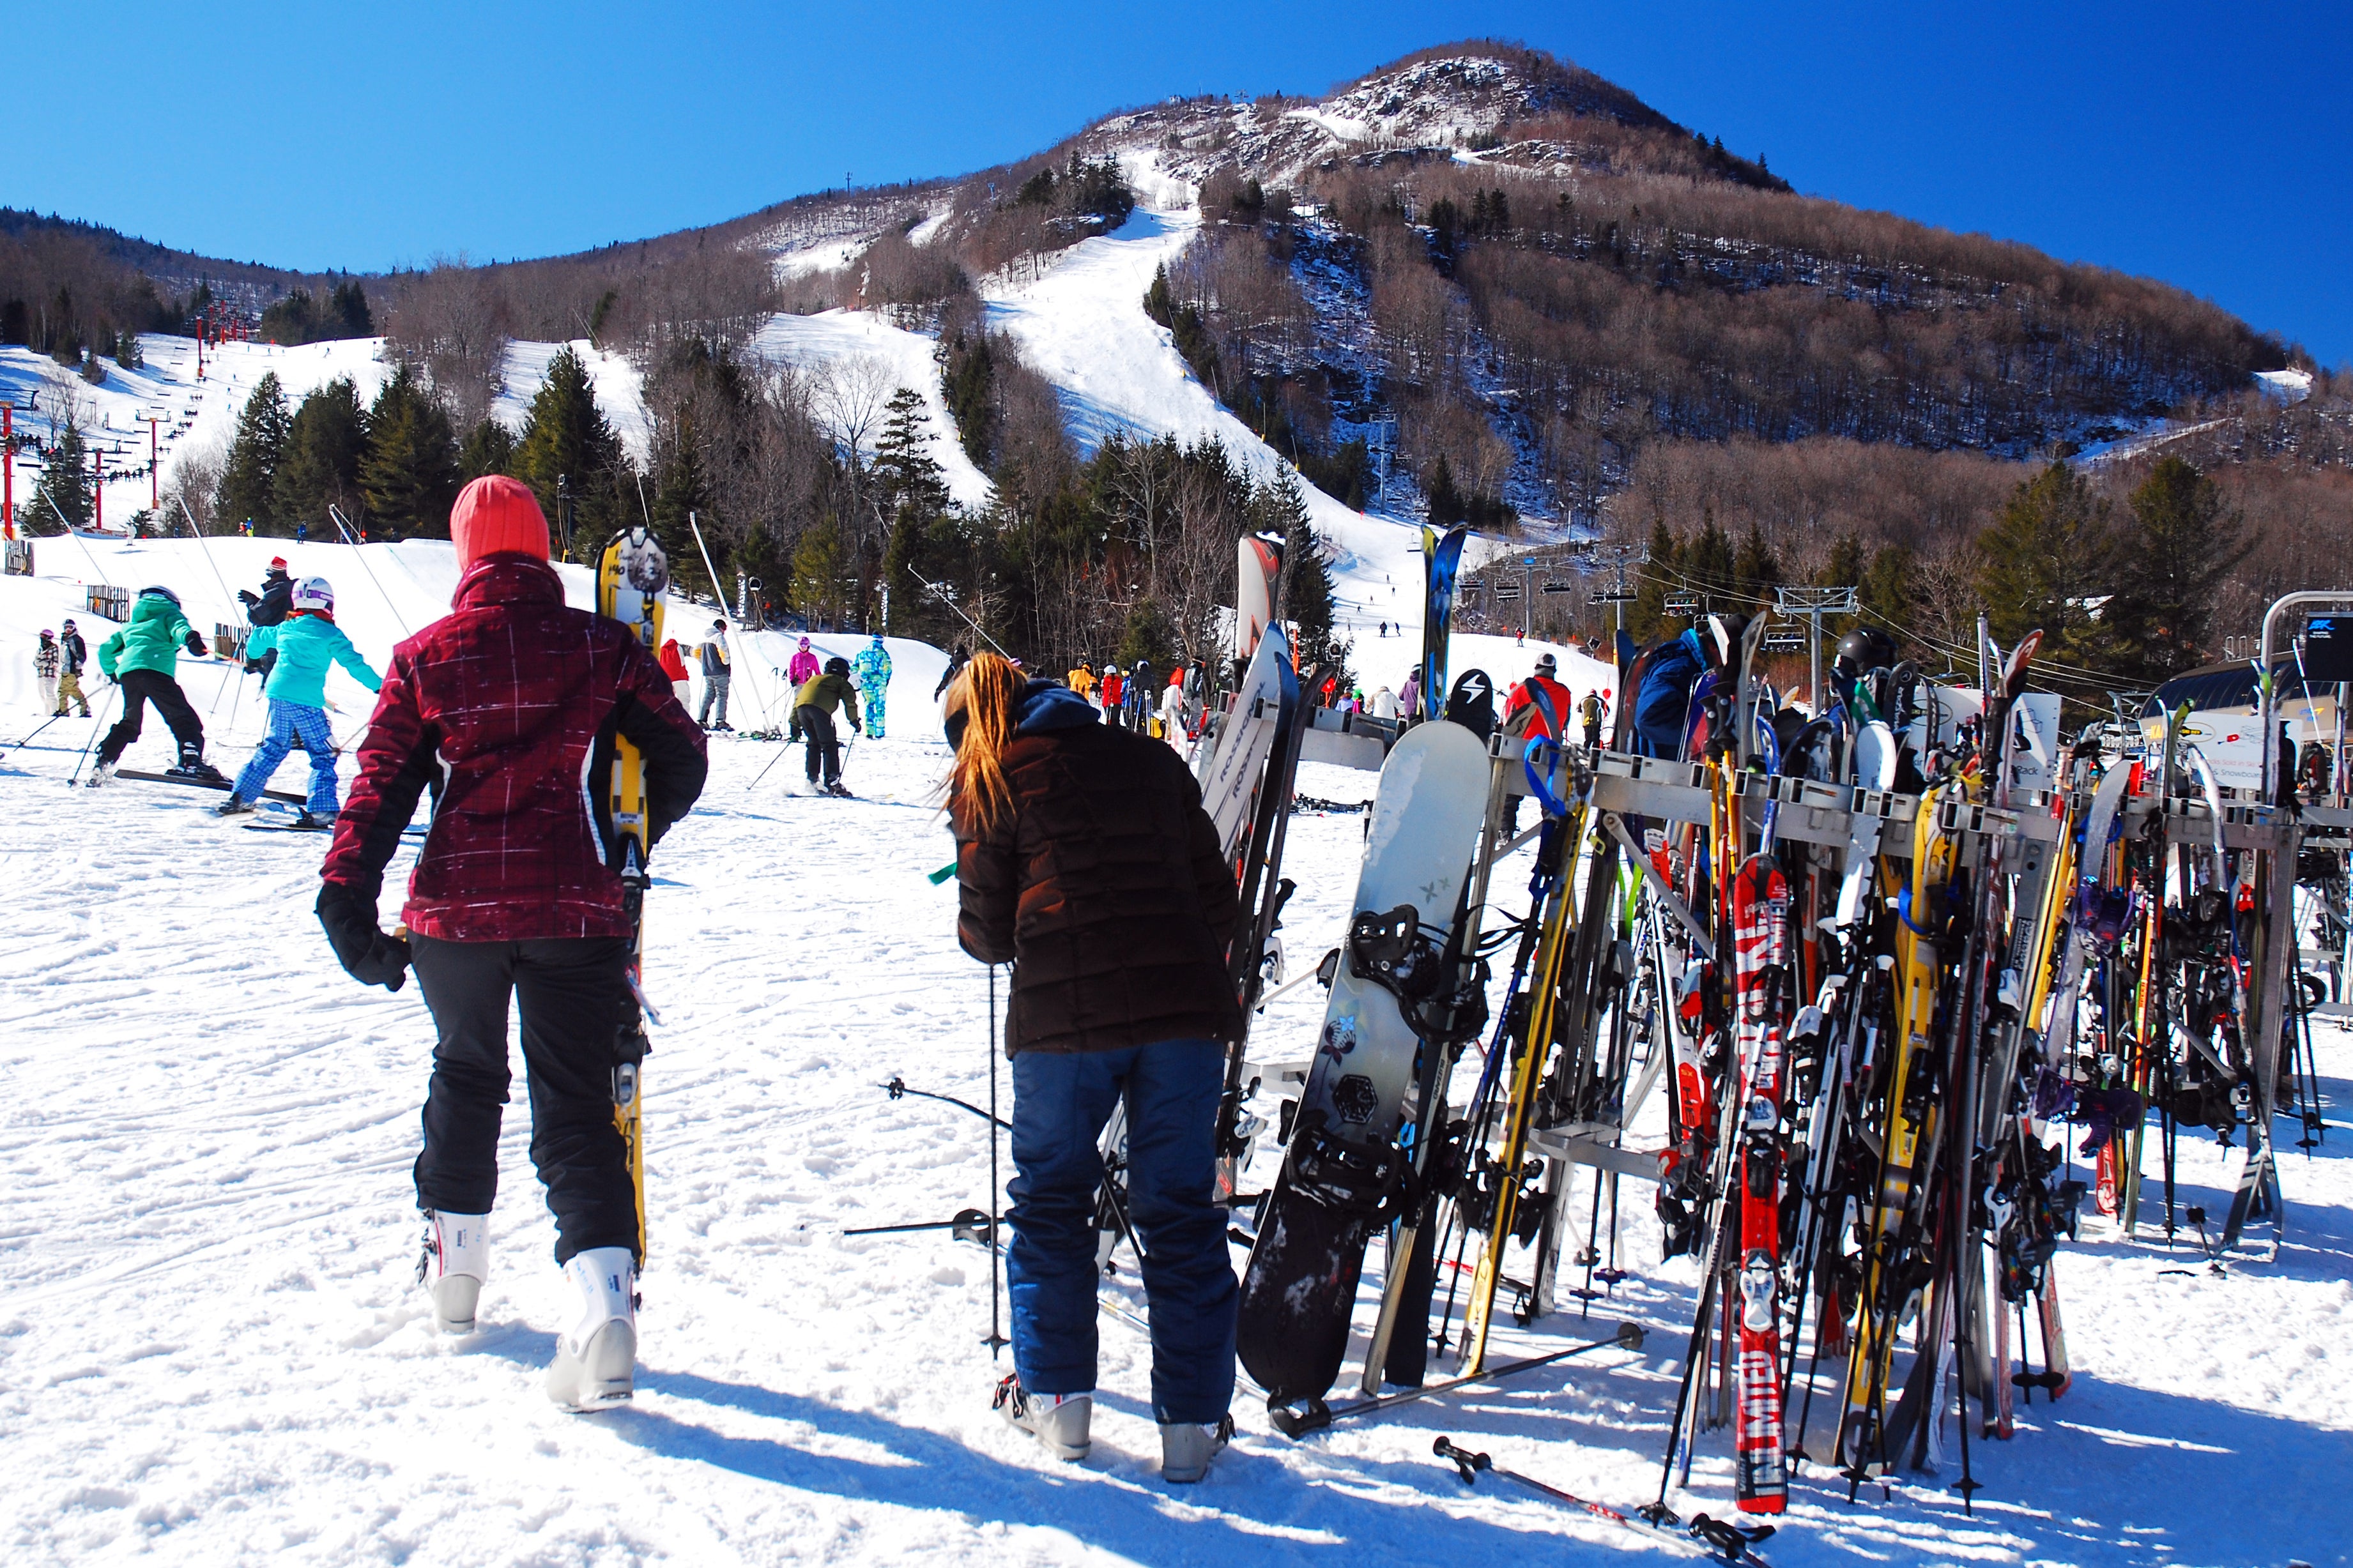 Three hours north of NYC, Hunter Mountain offers four faces of skiing fun